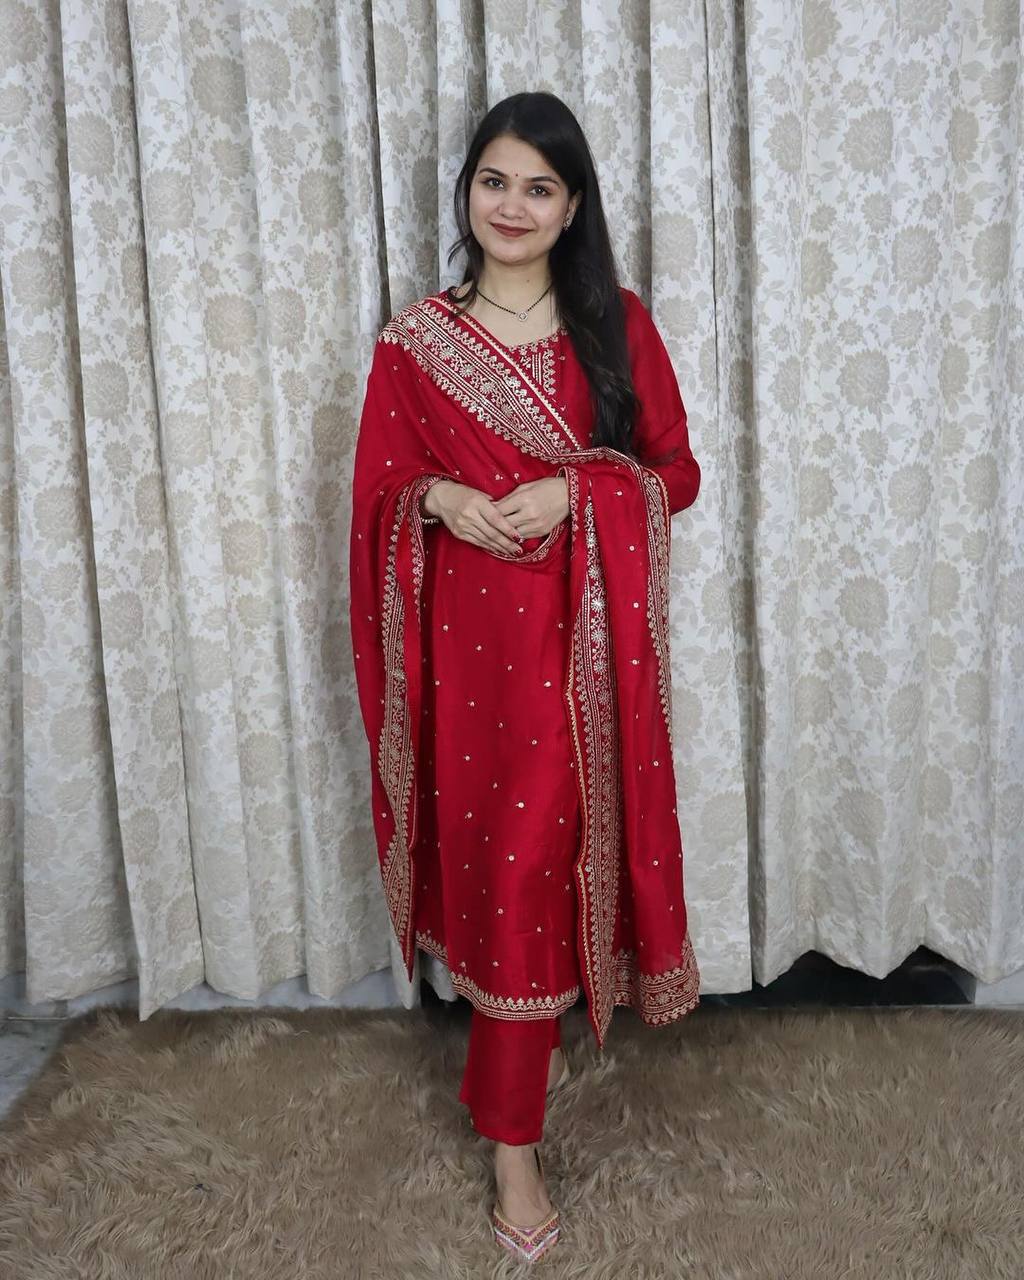 Raveena Tandon in a red anarkali suit at Karwa Chauth celebrations